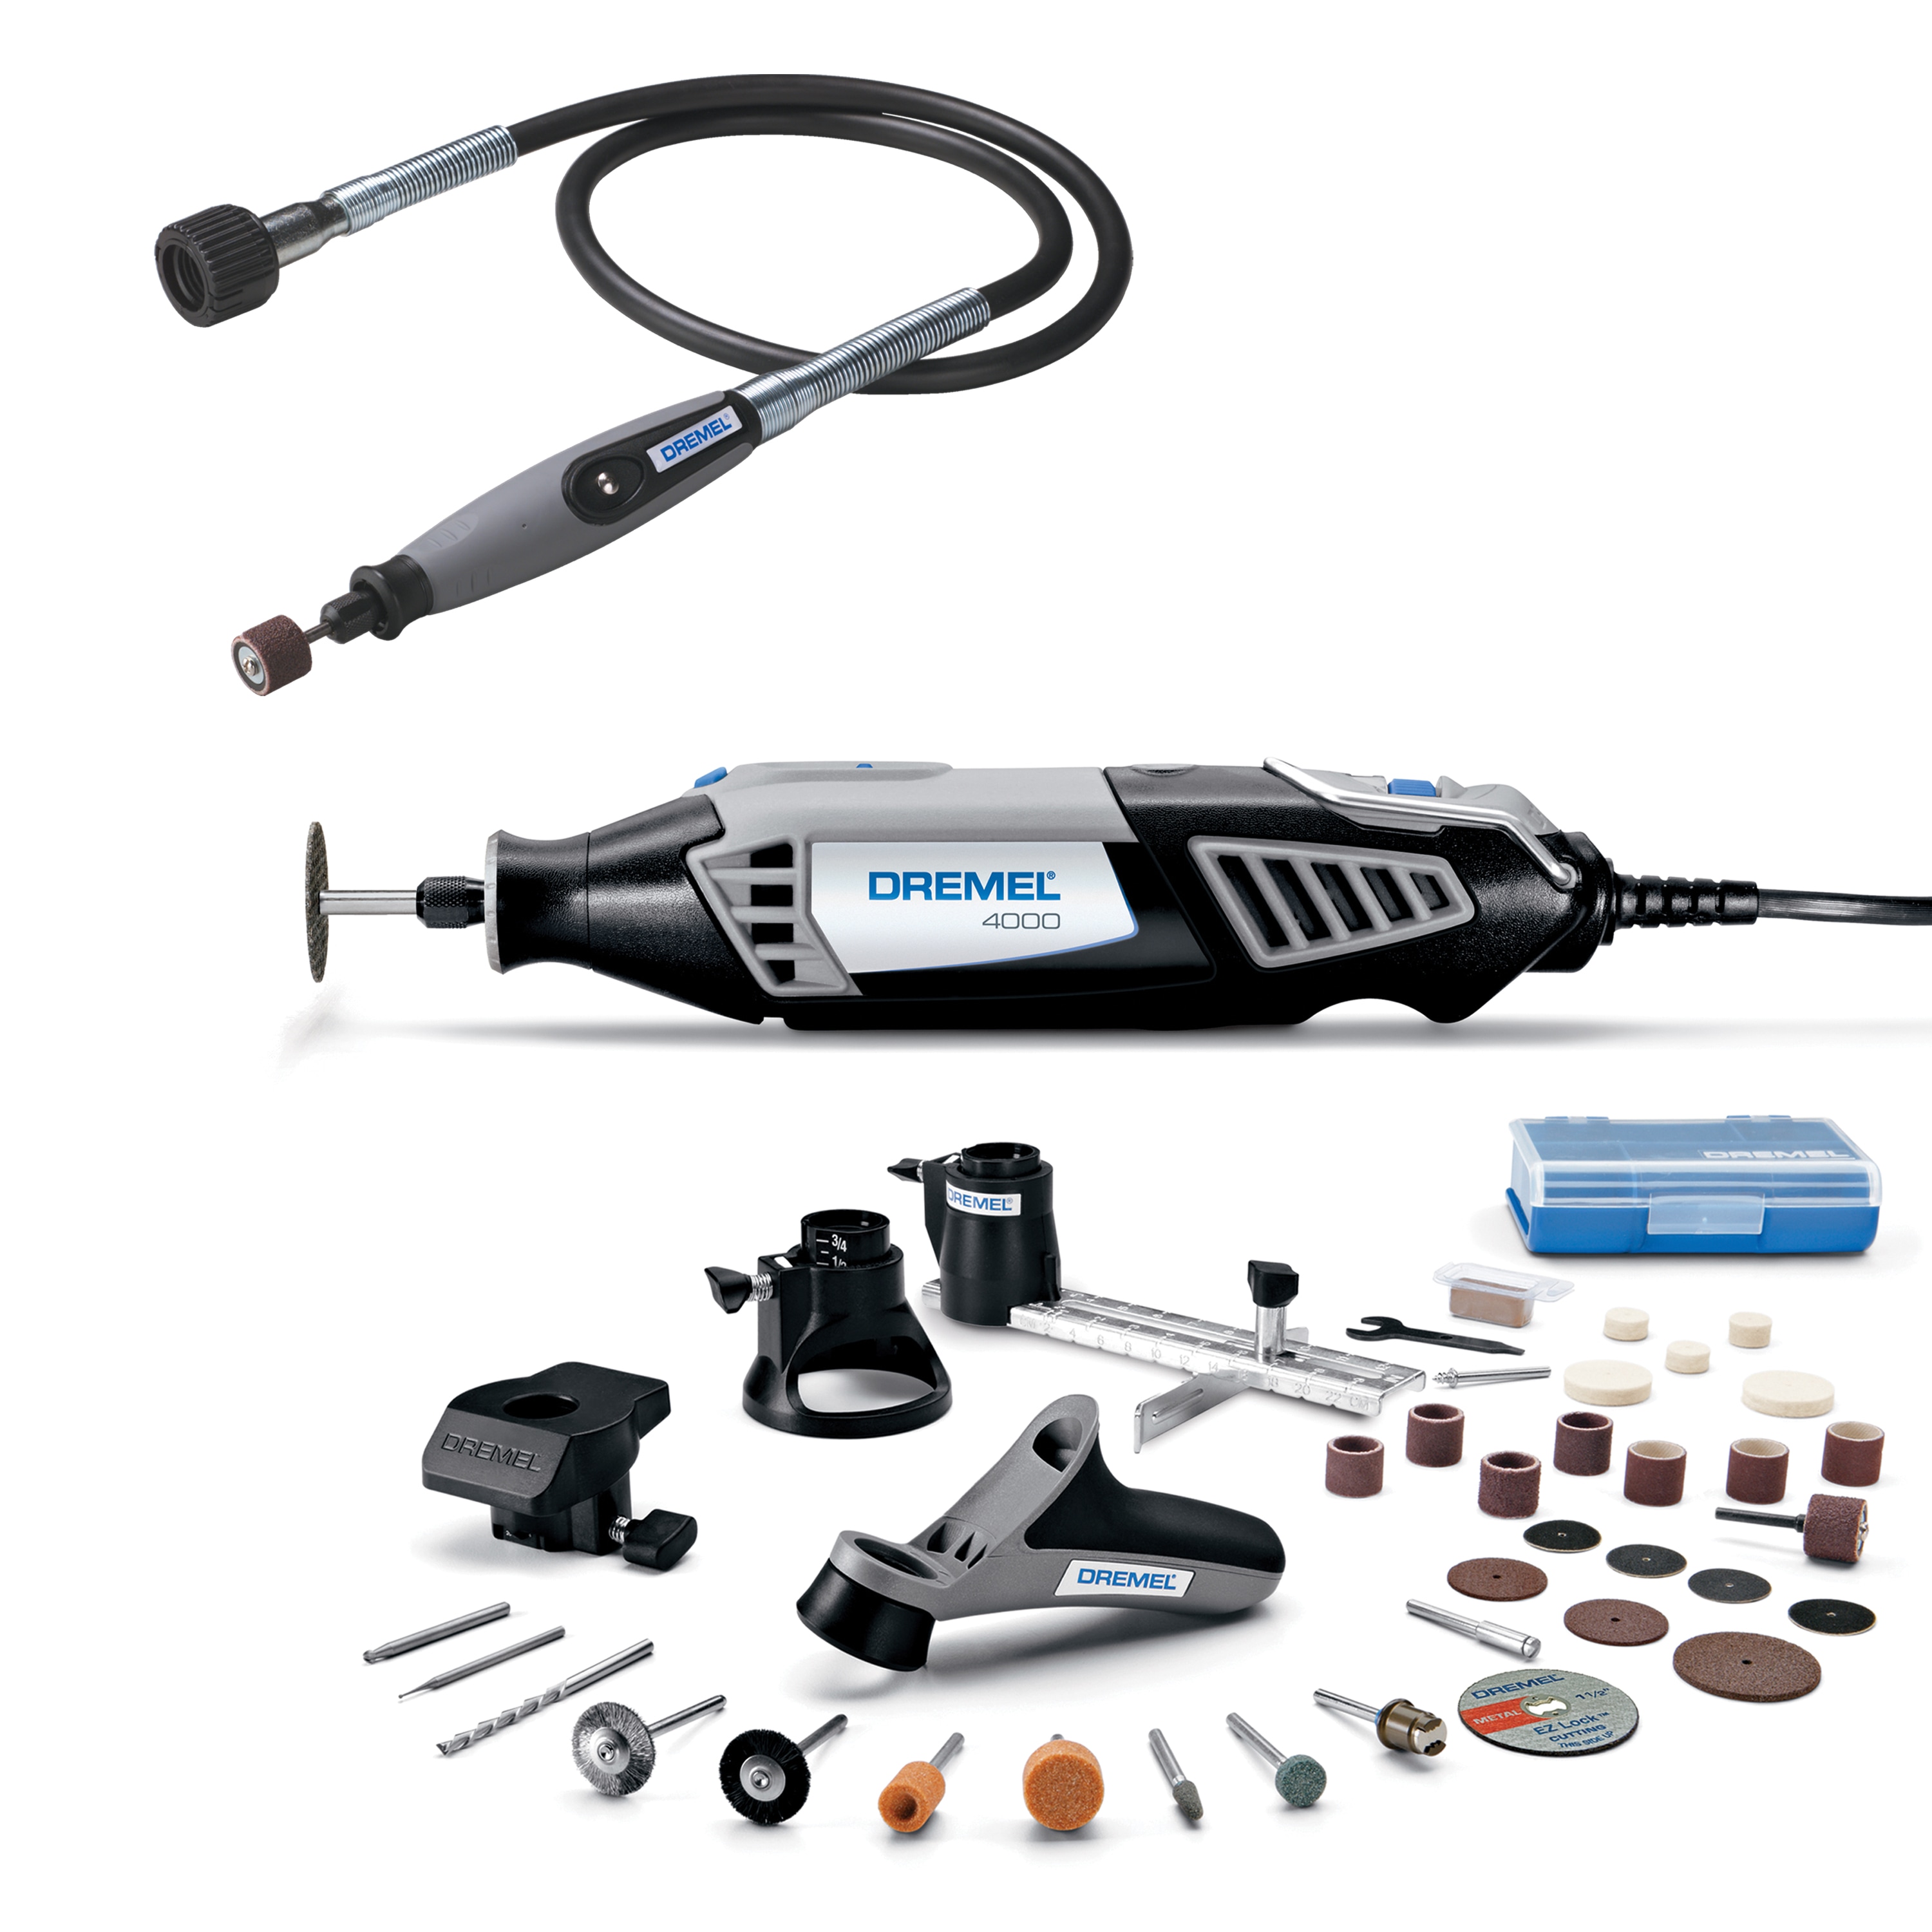 DREMEL 4300 5-50 Rotary Tool Kit Mini Electric Drill Grinder Grinding With  LED Light 5